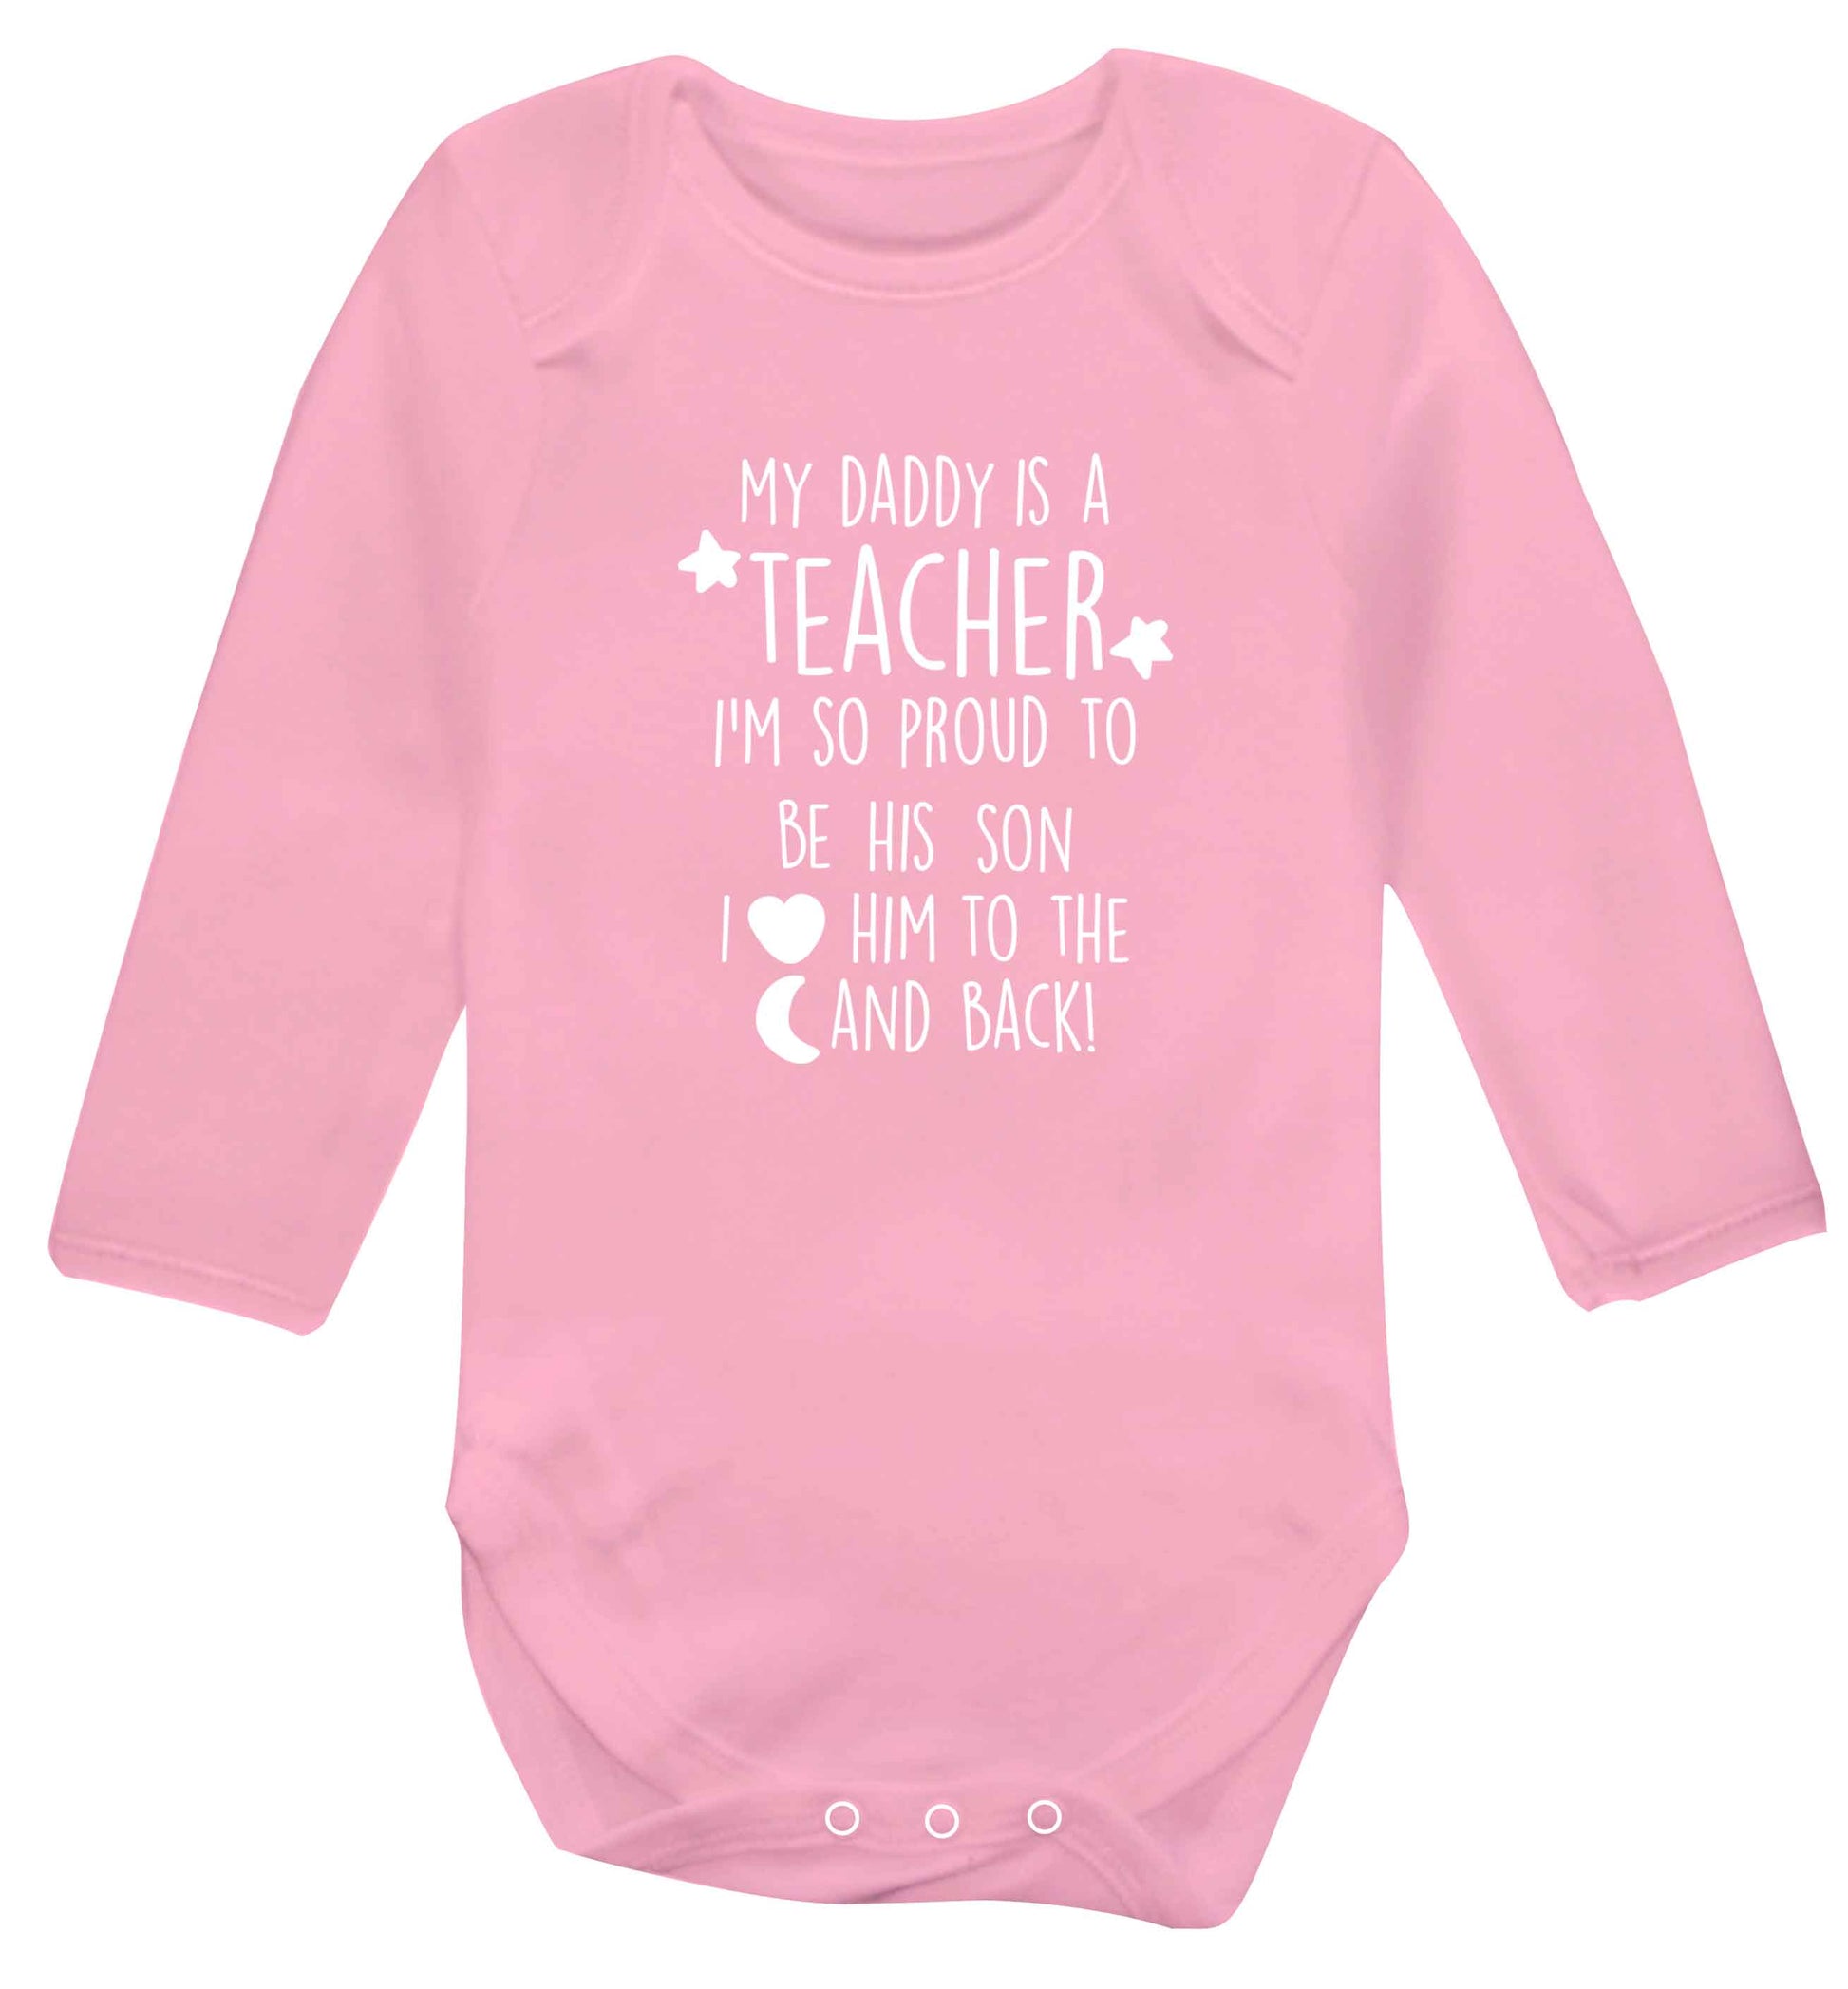 My daddy is a teacher I'm so proud to be his son I love her to the moon and back baby vest long sleeved pale pink 6-12 months